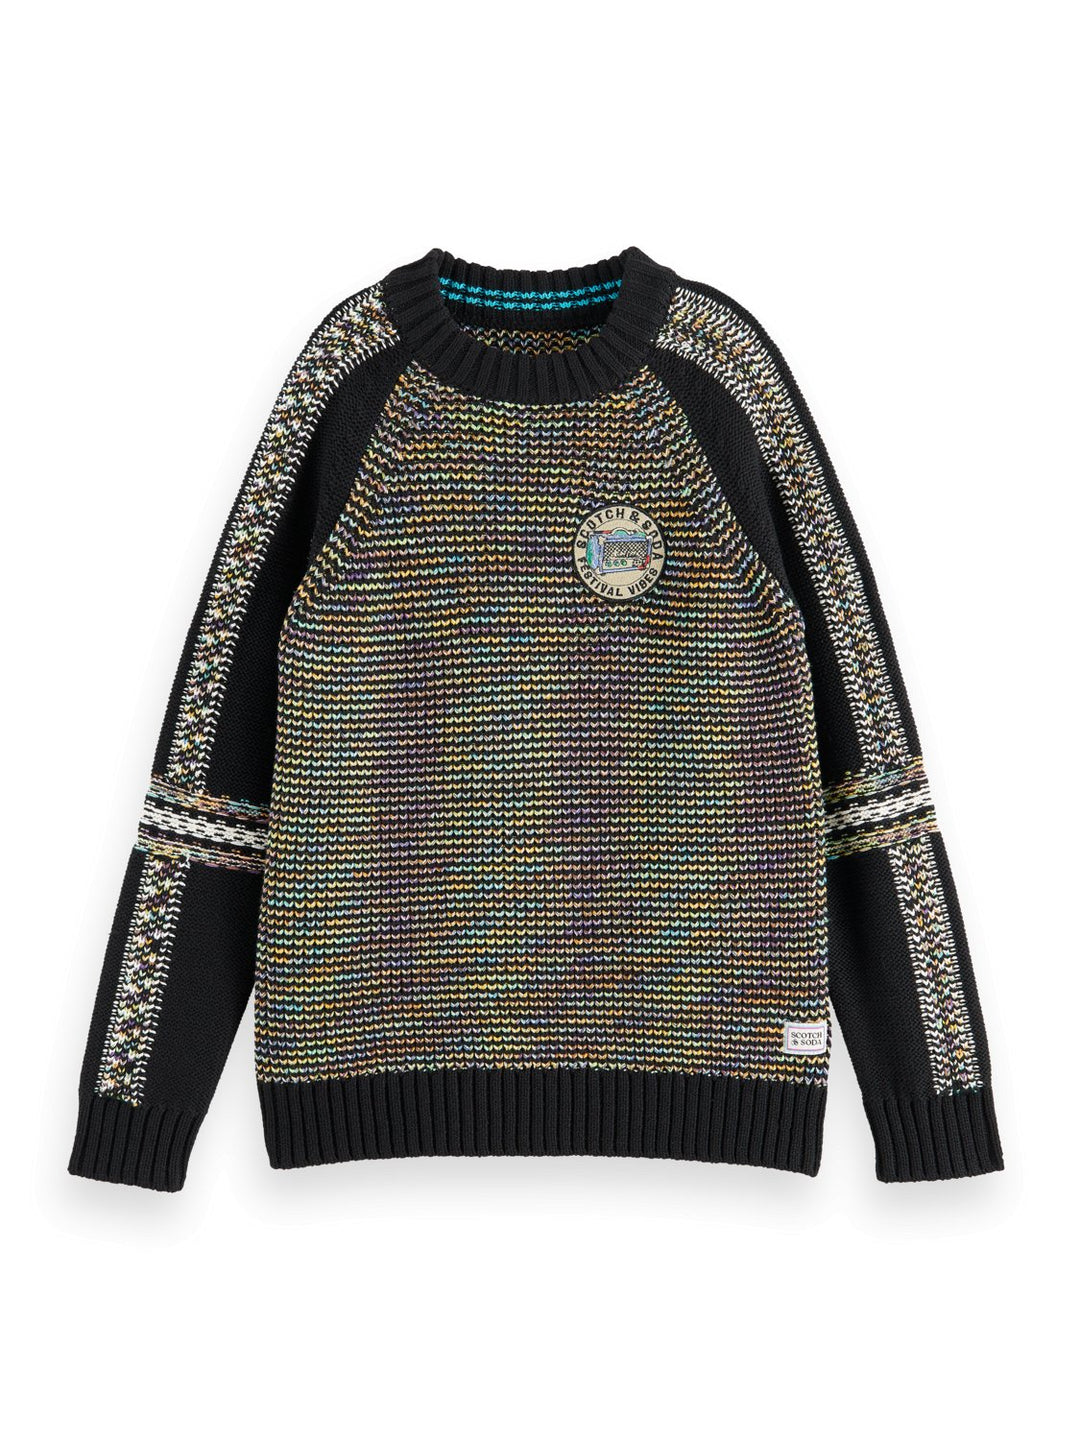 Boys Colordul Structured Pullover - Multi Mel 6429 - Posh New York